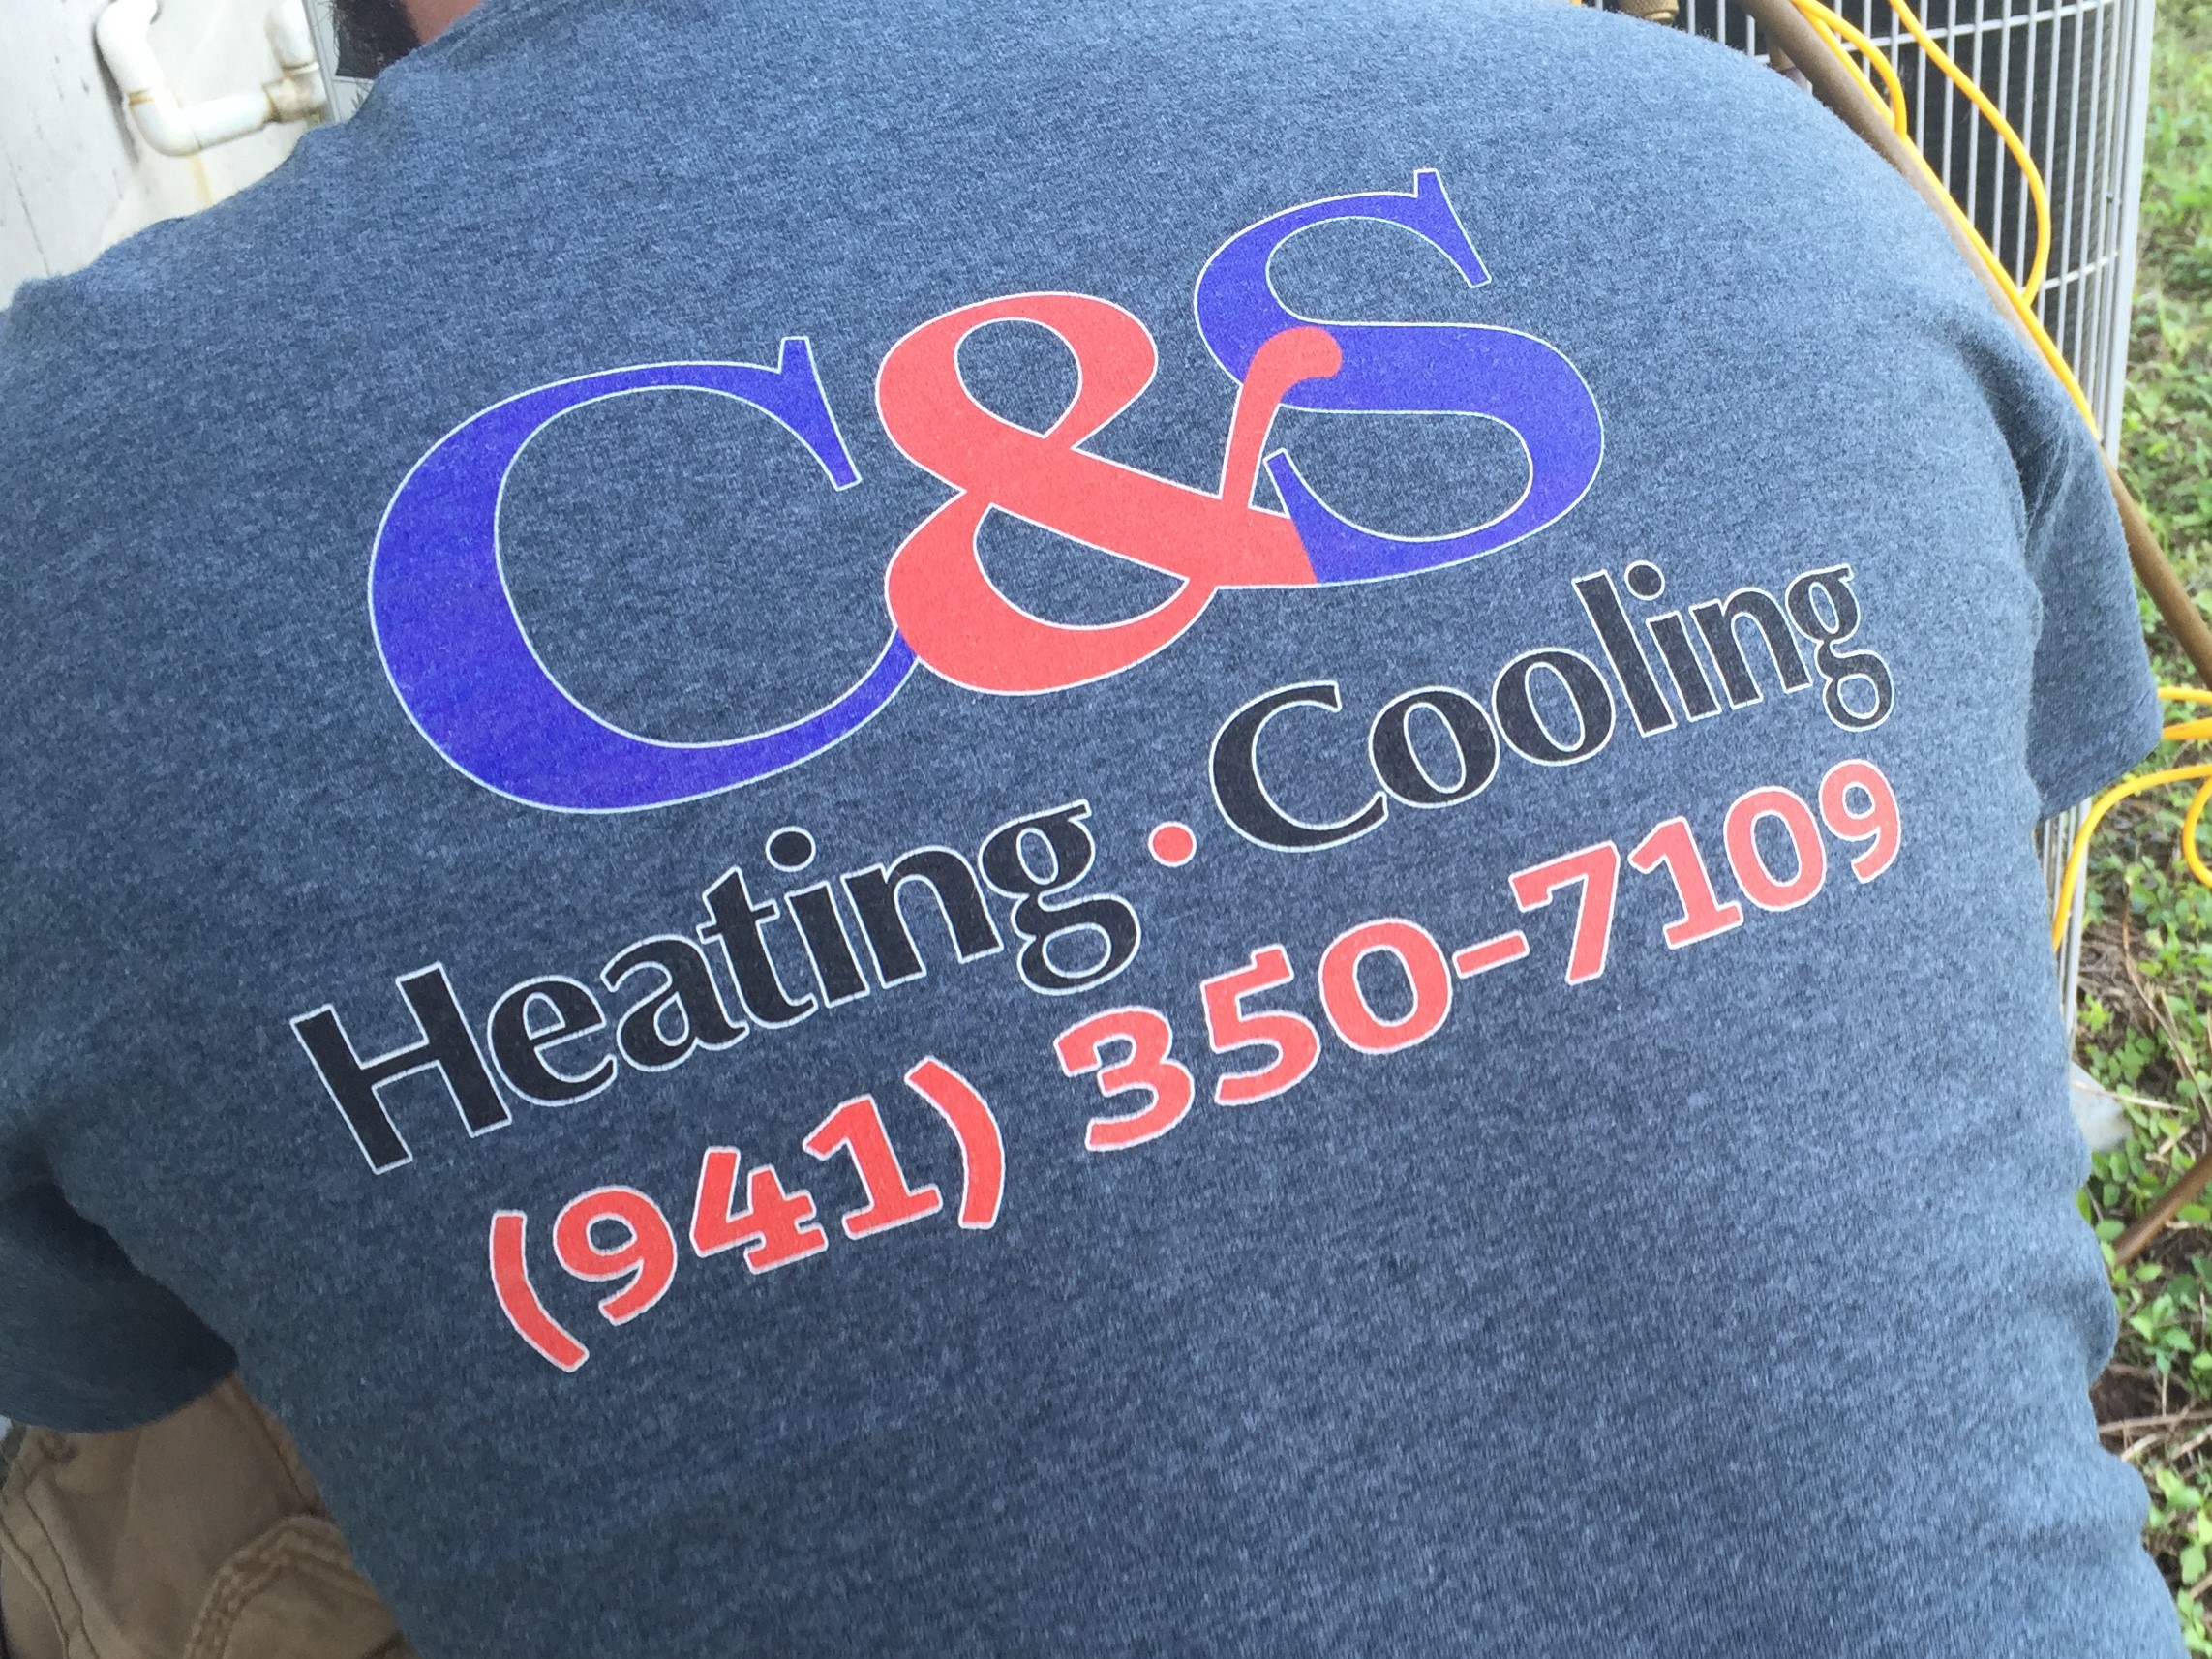 C&S Heating and Cooling LLC Photo